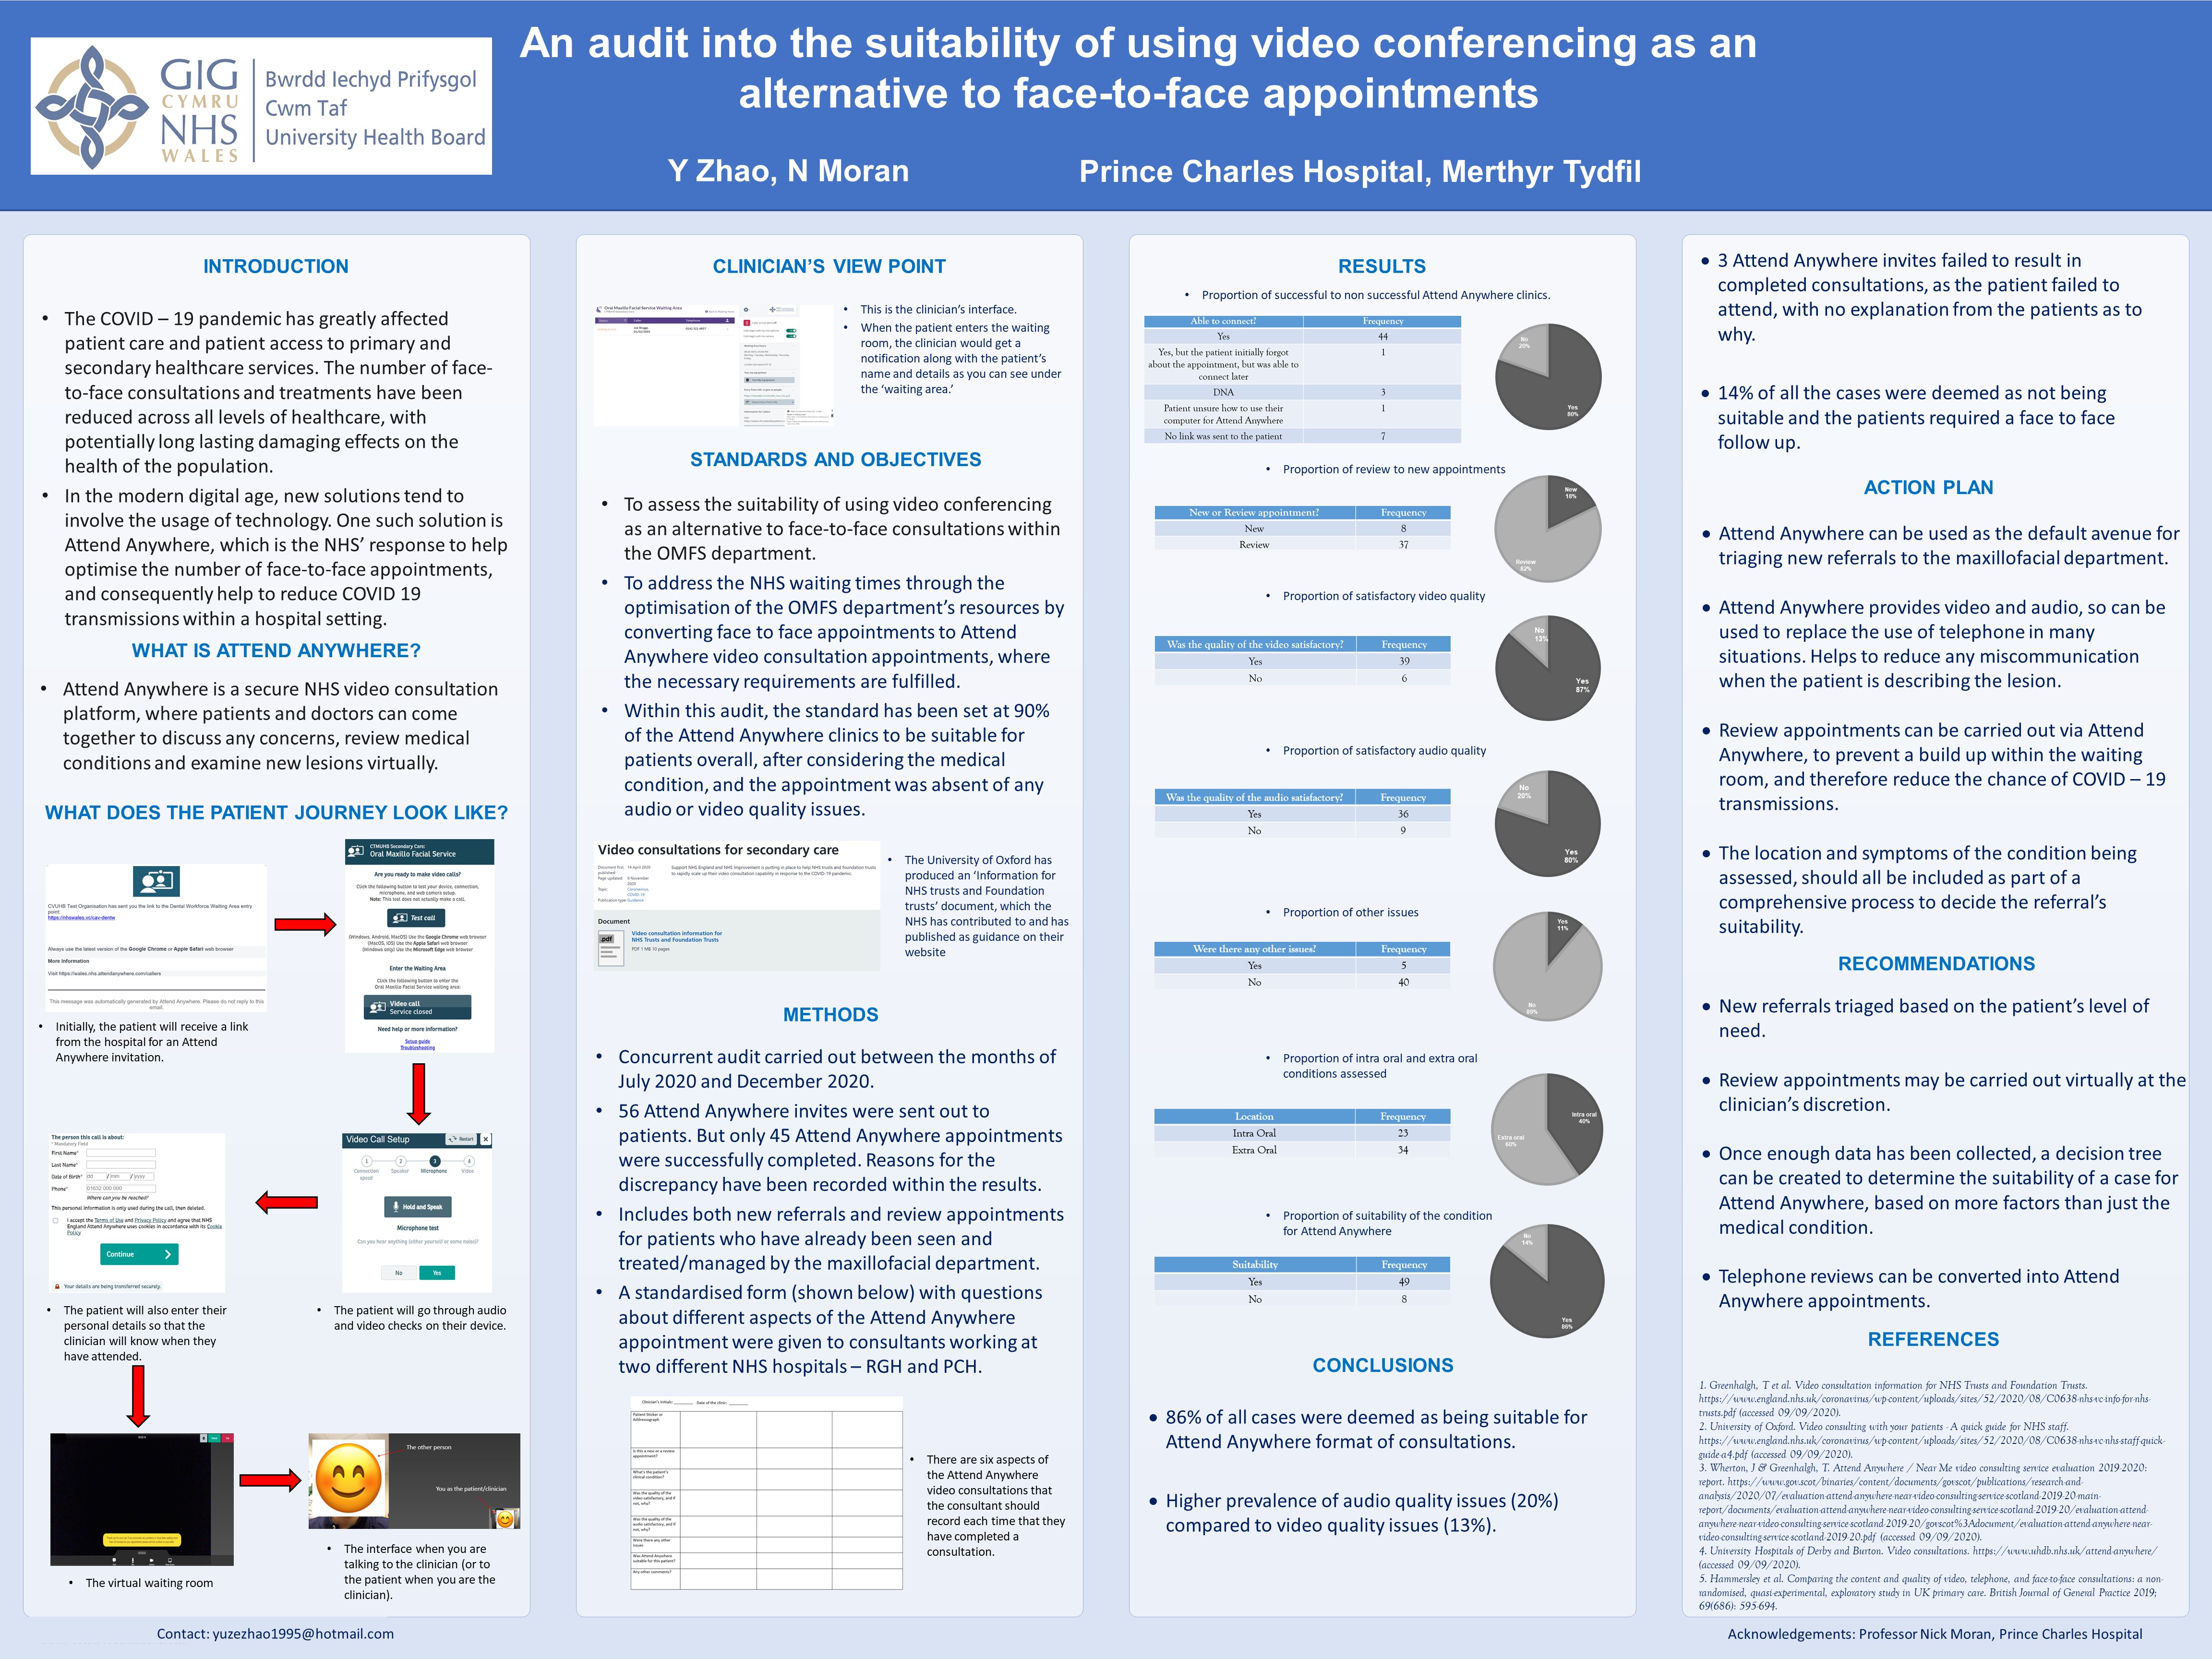 Poster An audit into the suitability of using video conferencing as an alternative to face-to-face appointments.